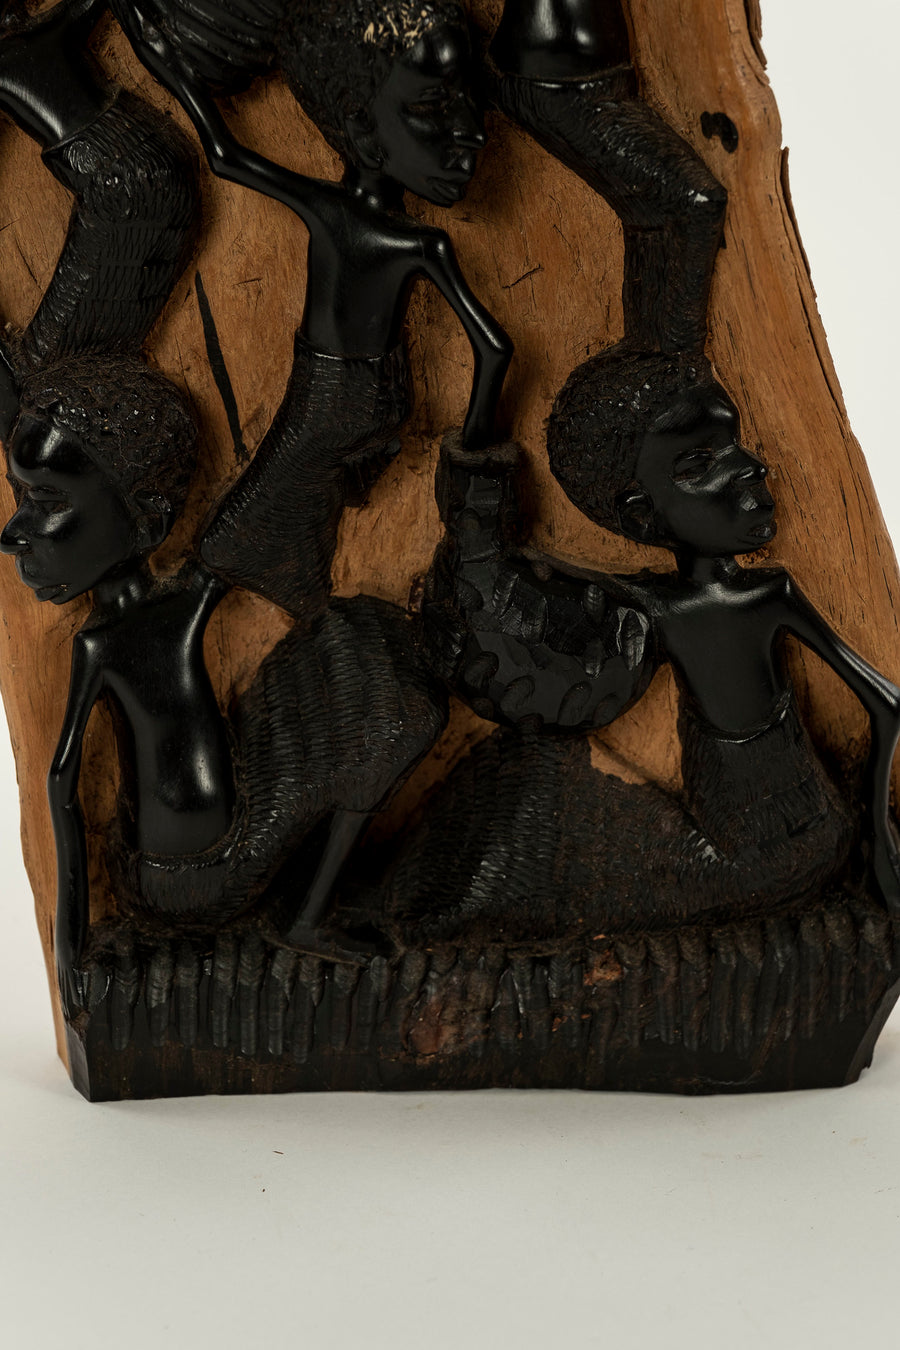 Contemporary Ebony Makonde African Wood Carving